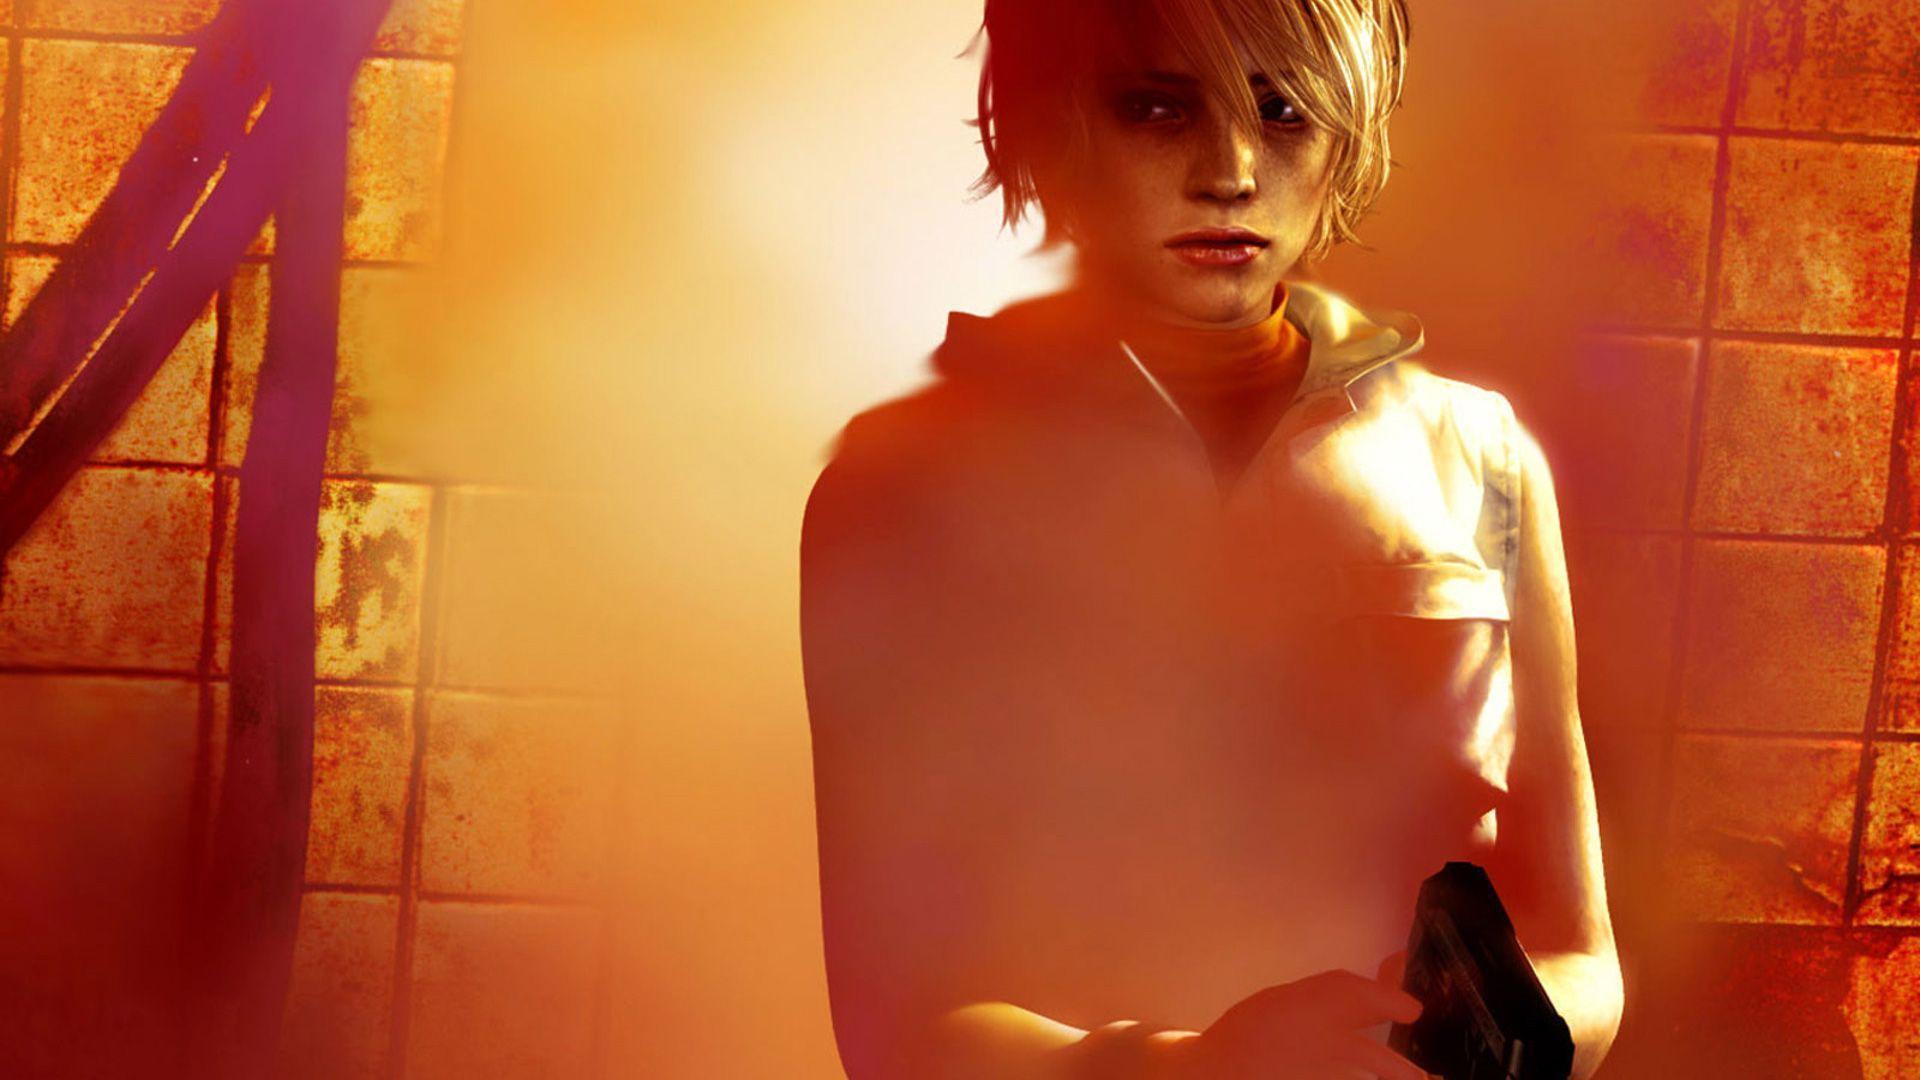 Free Silent Hill 3 Wallpaper in 1920x1080